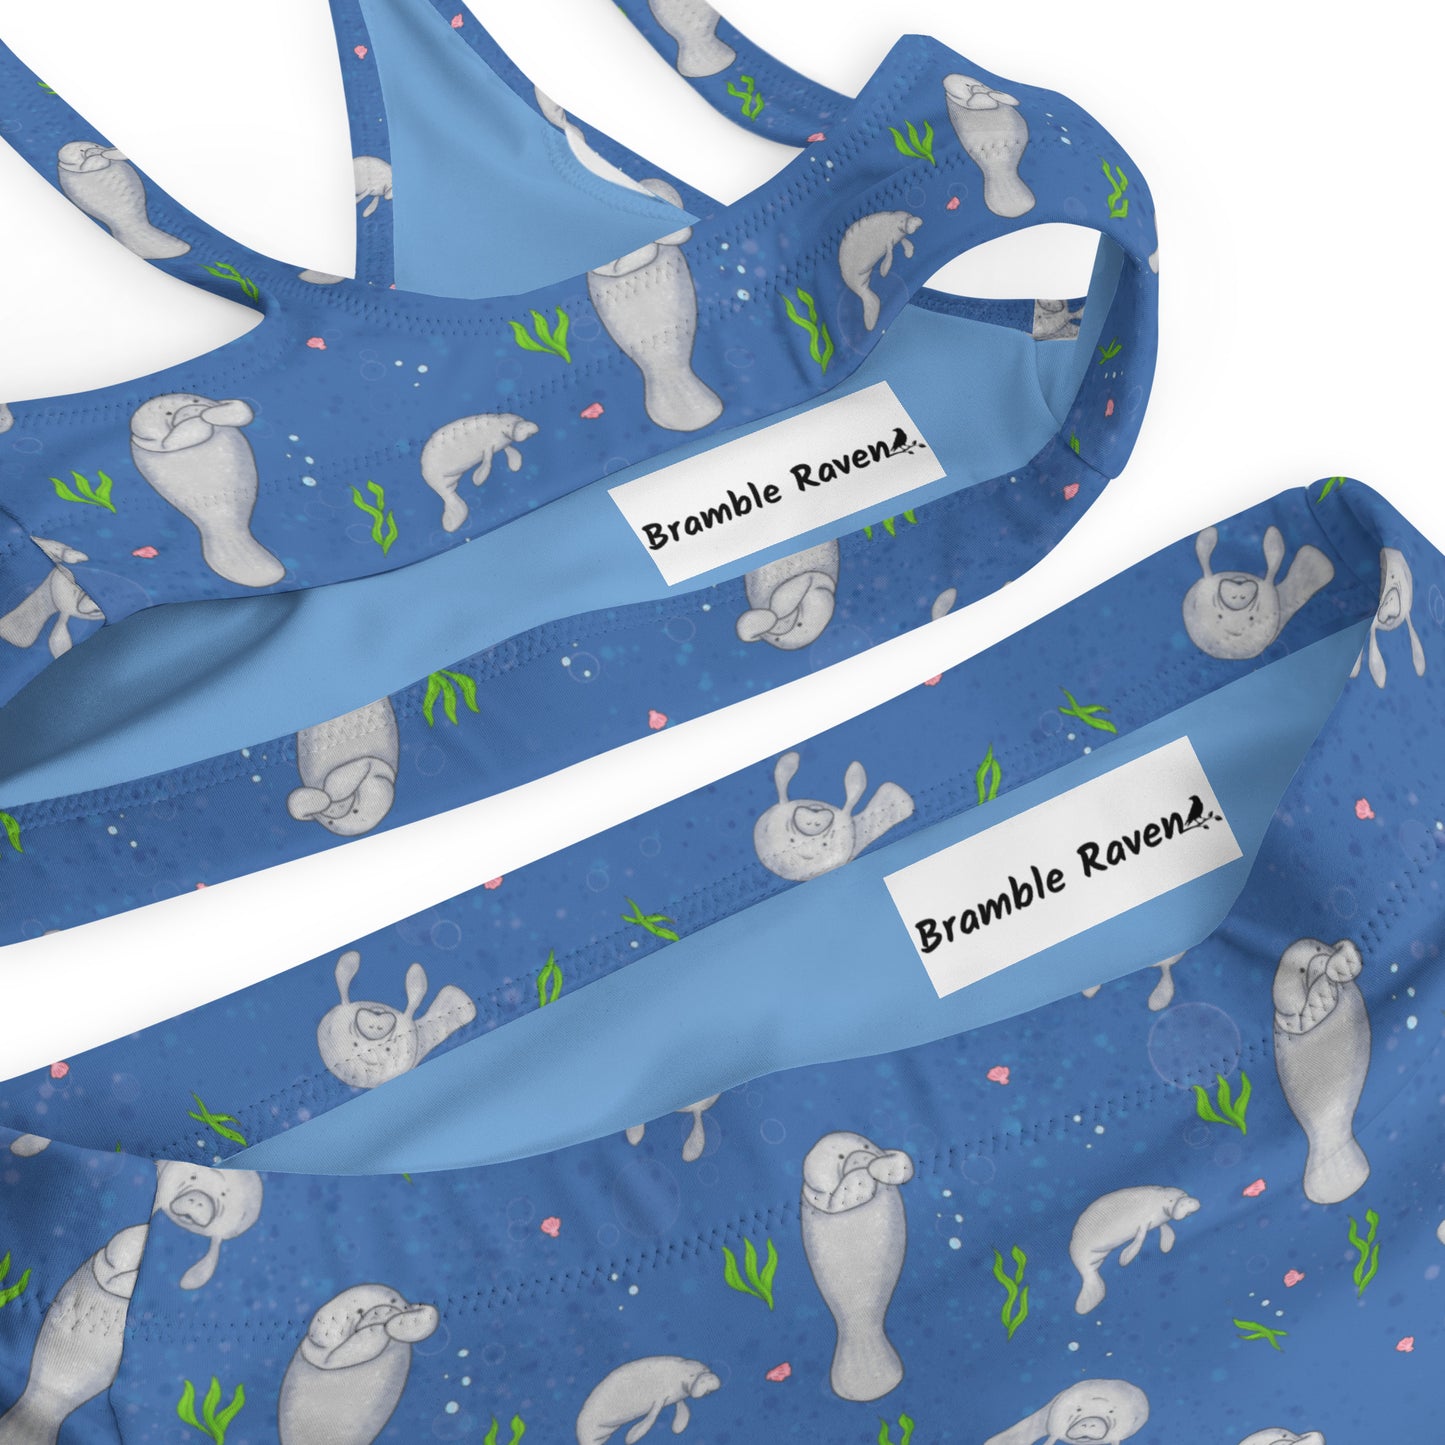 High-waisted bikini with hand-illustrated manatee pattern on a blue background. Made from recycled polyester combined with stretchable fabric. Has double layers and removable pads. Detail view of inner lining and zigzag stitching.